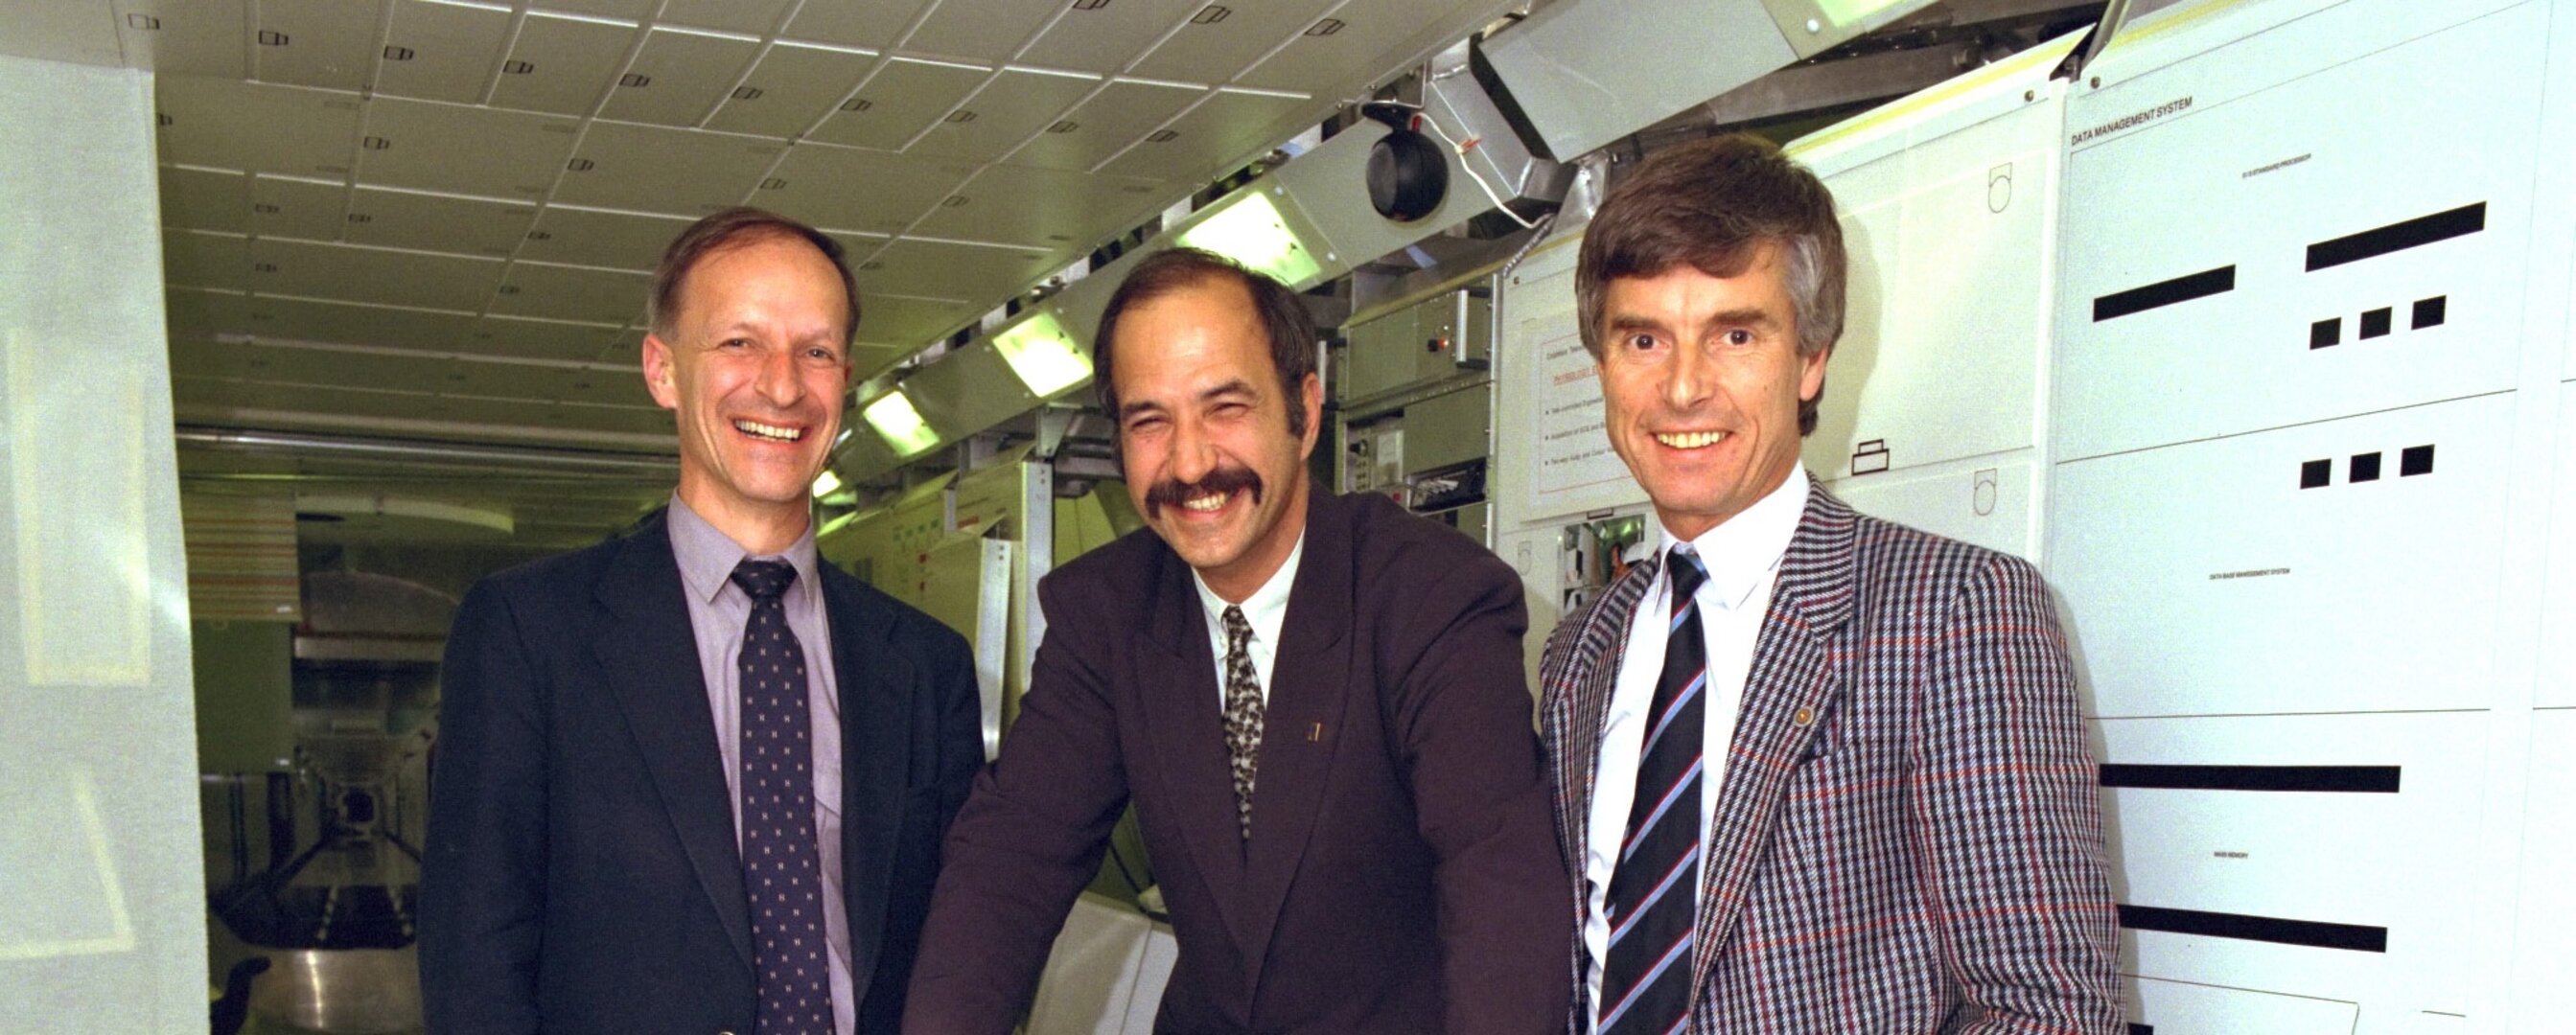 ESA's first astronauts (from left to right) Claude Nicollier, Wubbo Ockels and Ulf Merbold